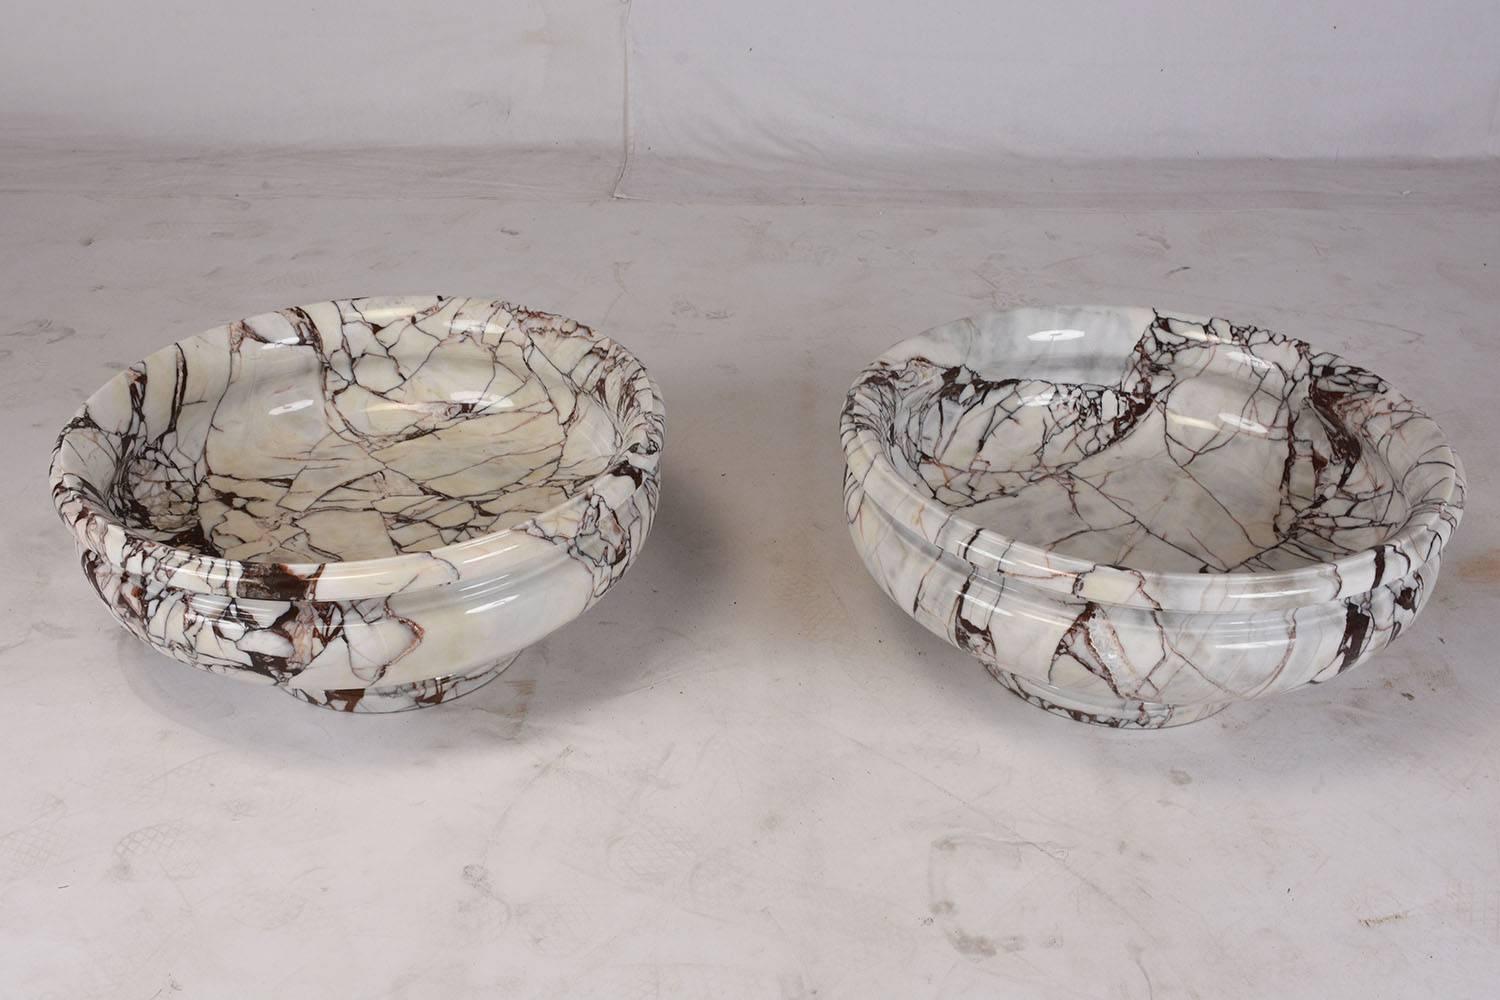 This 1950s pair of French garden urns are made from carved marble in a white color with rouge veins with a polished finish. The elegant architectural details will make these a great addition to any home garden. The urns are in excellent condition